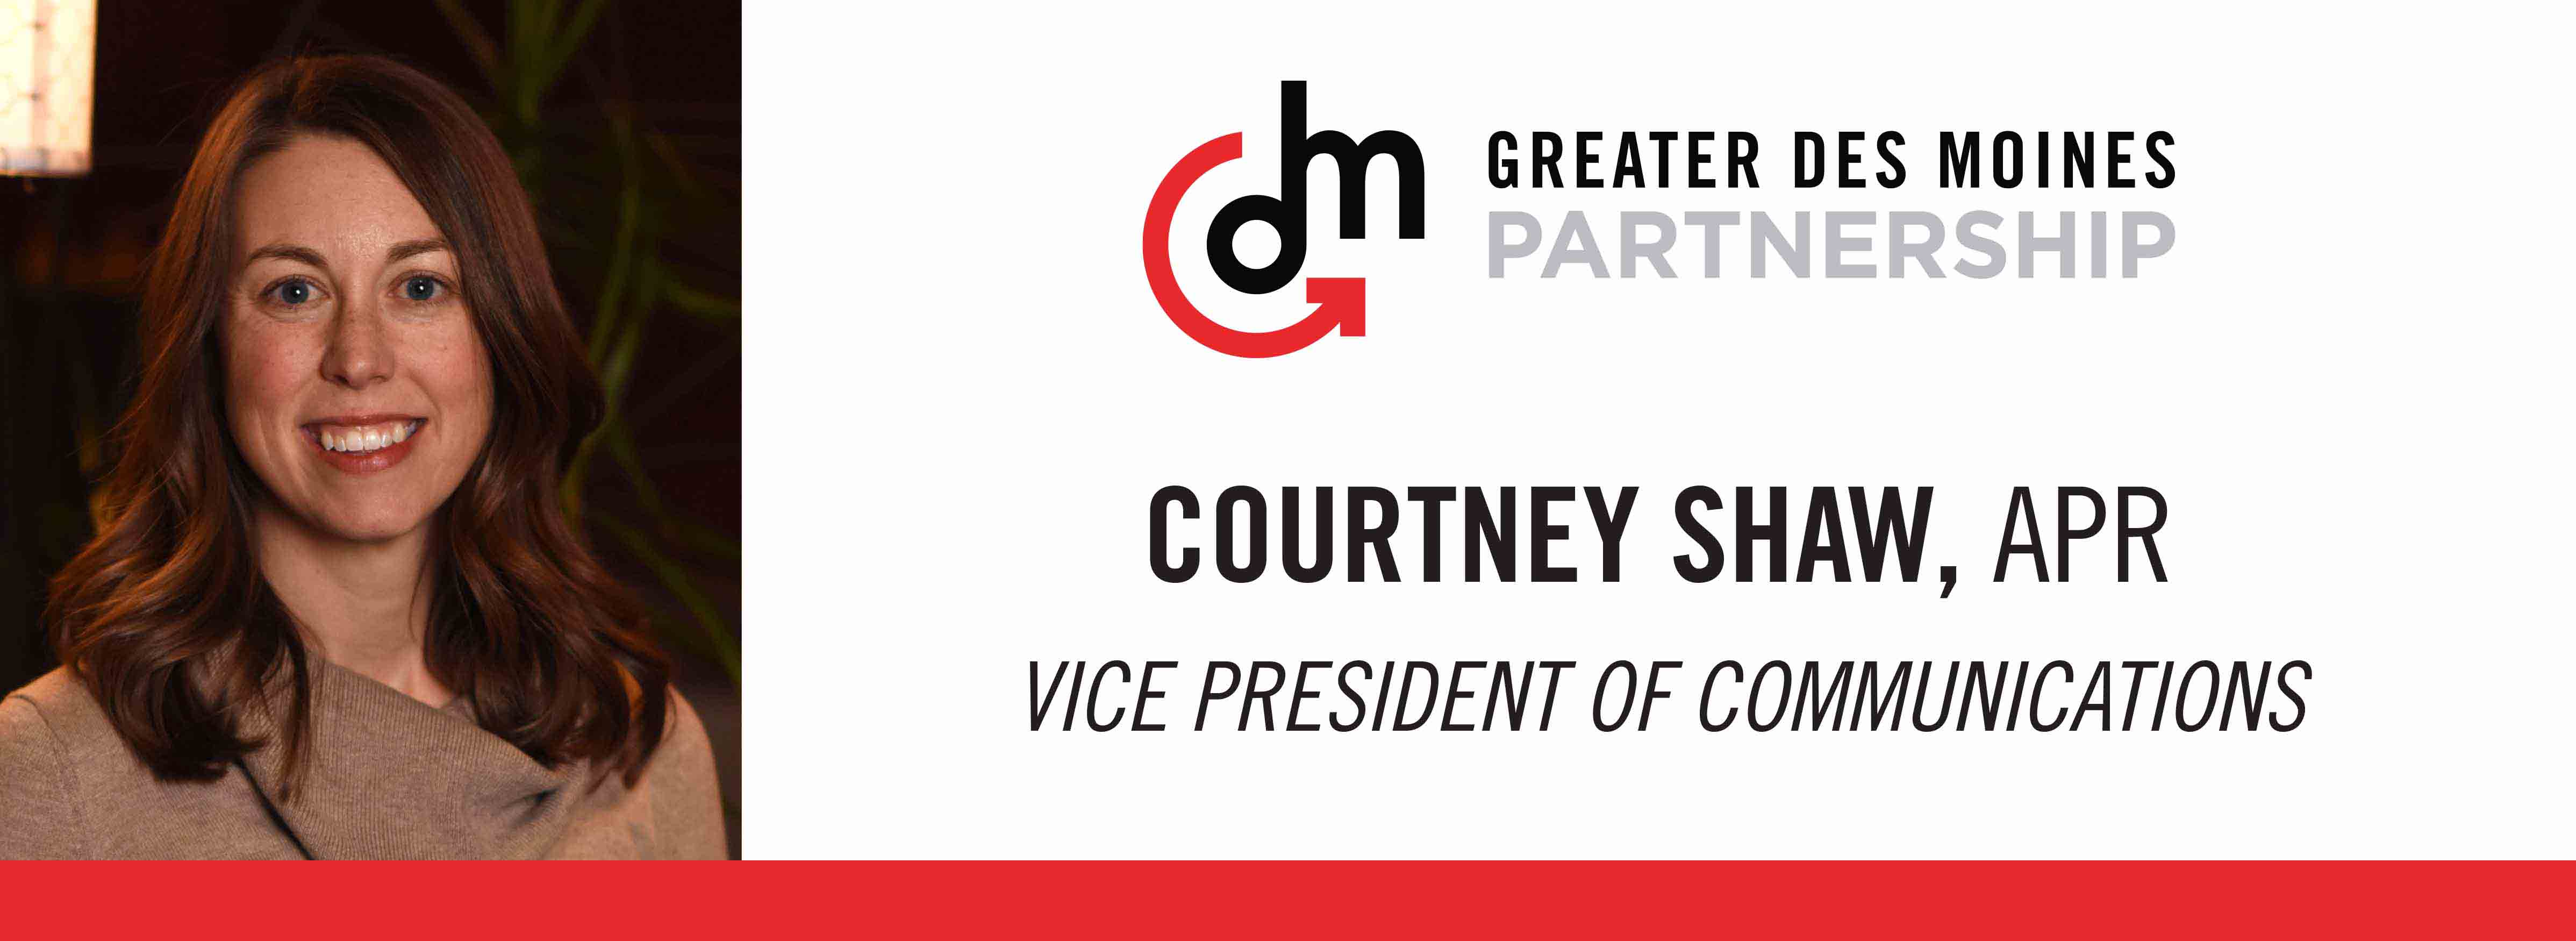 Courtney Shaw, APR, Vice President of Communications